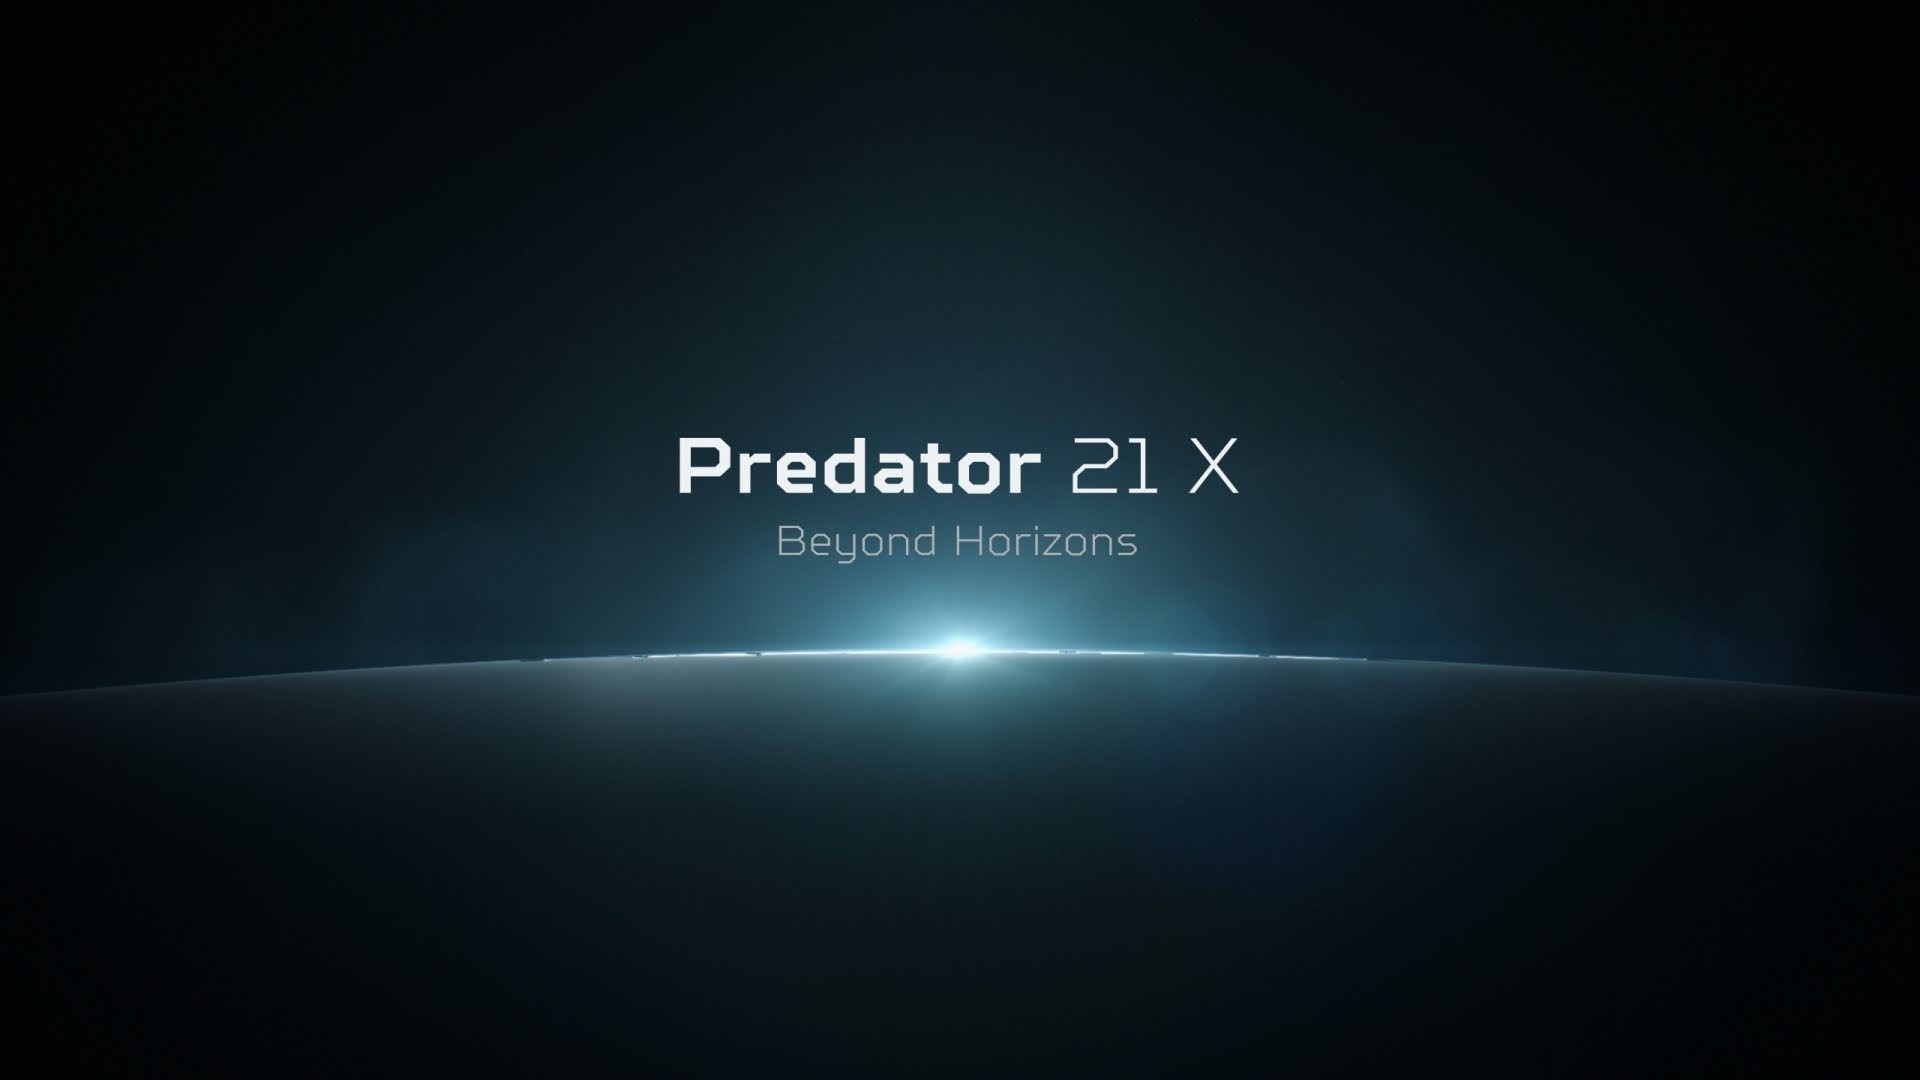 Acer Predator Wallpapers (67+ pictures)